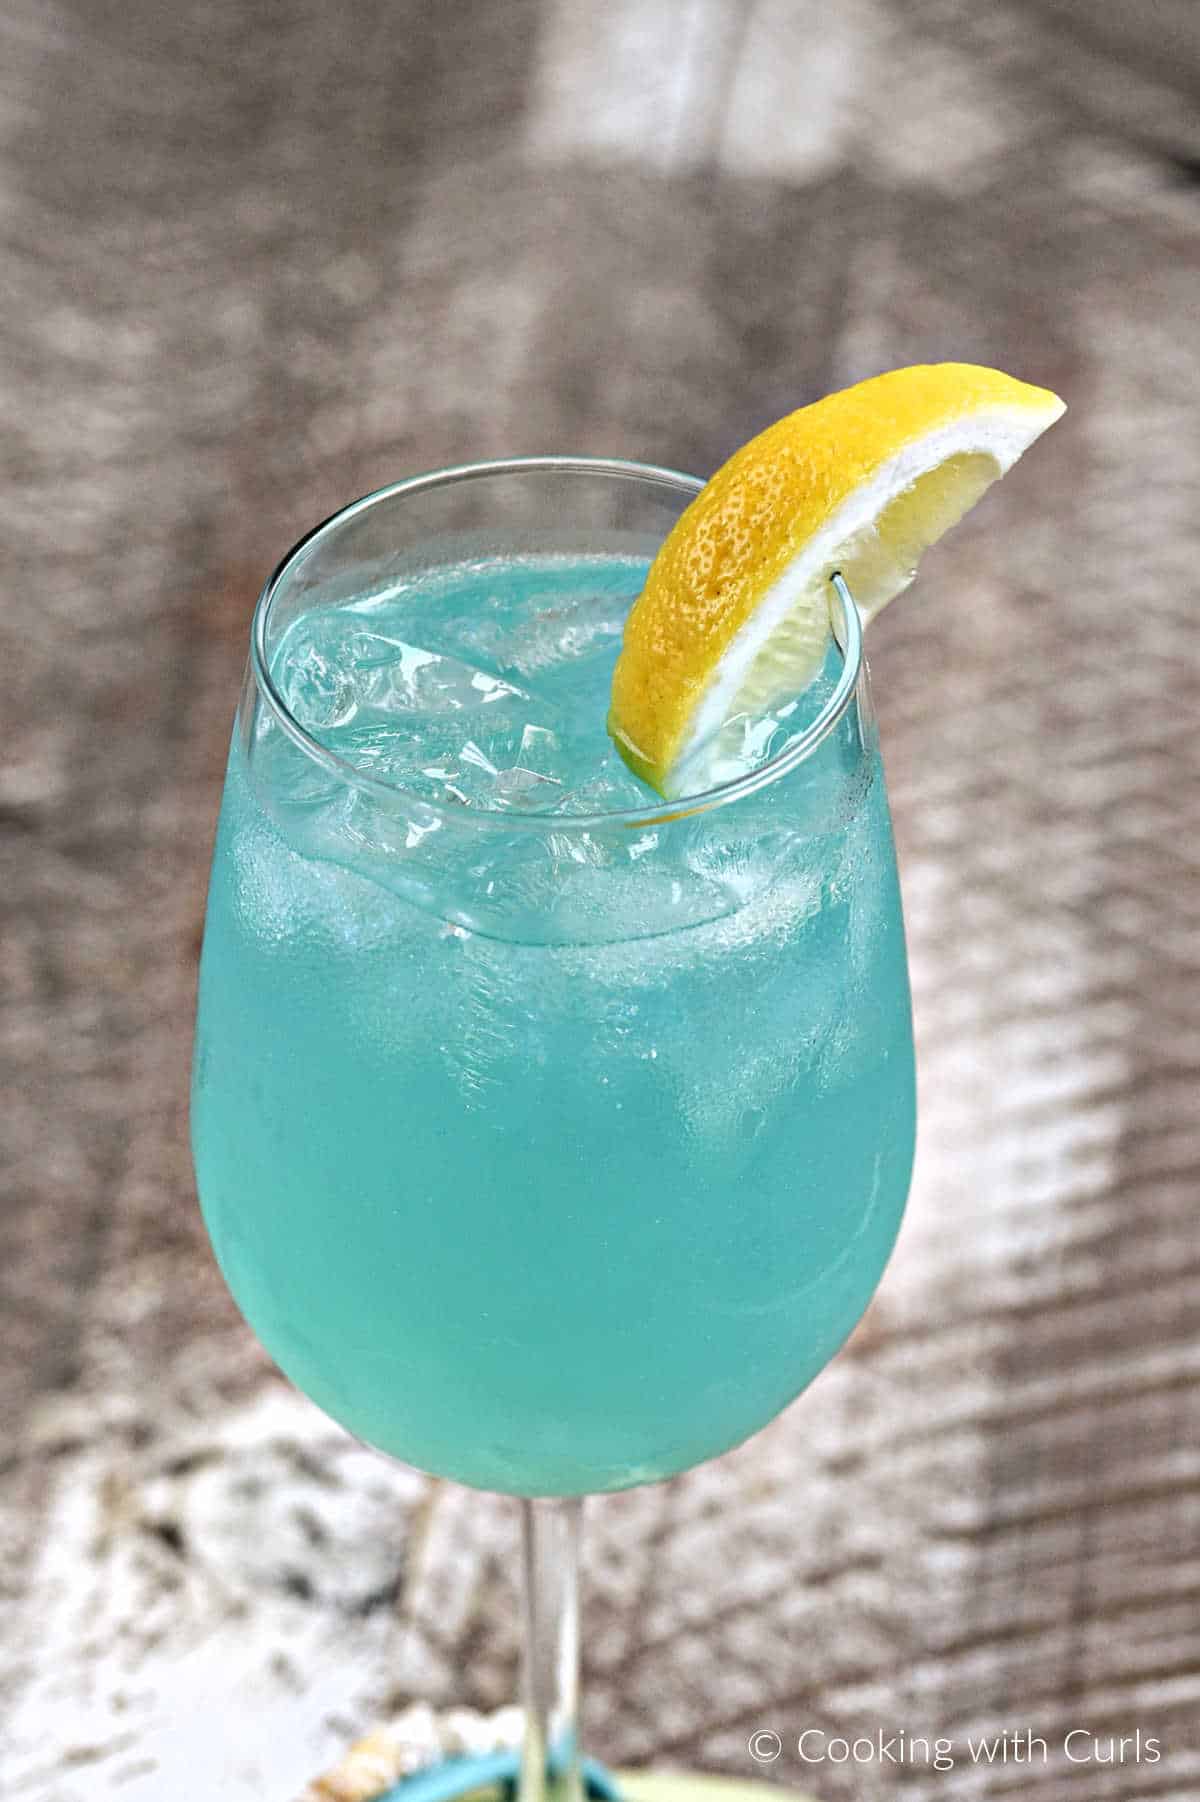 Teal blue cocktail with ice cubes in a wine glass with a lemon wedge on the rim.